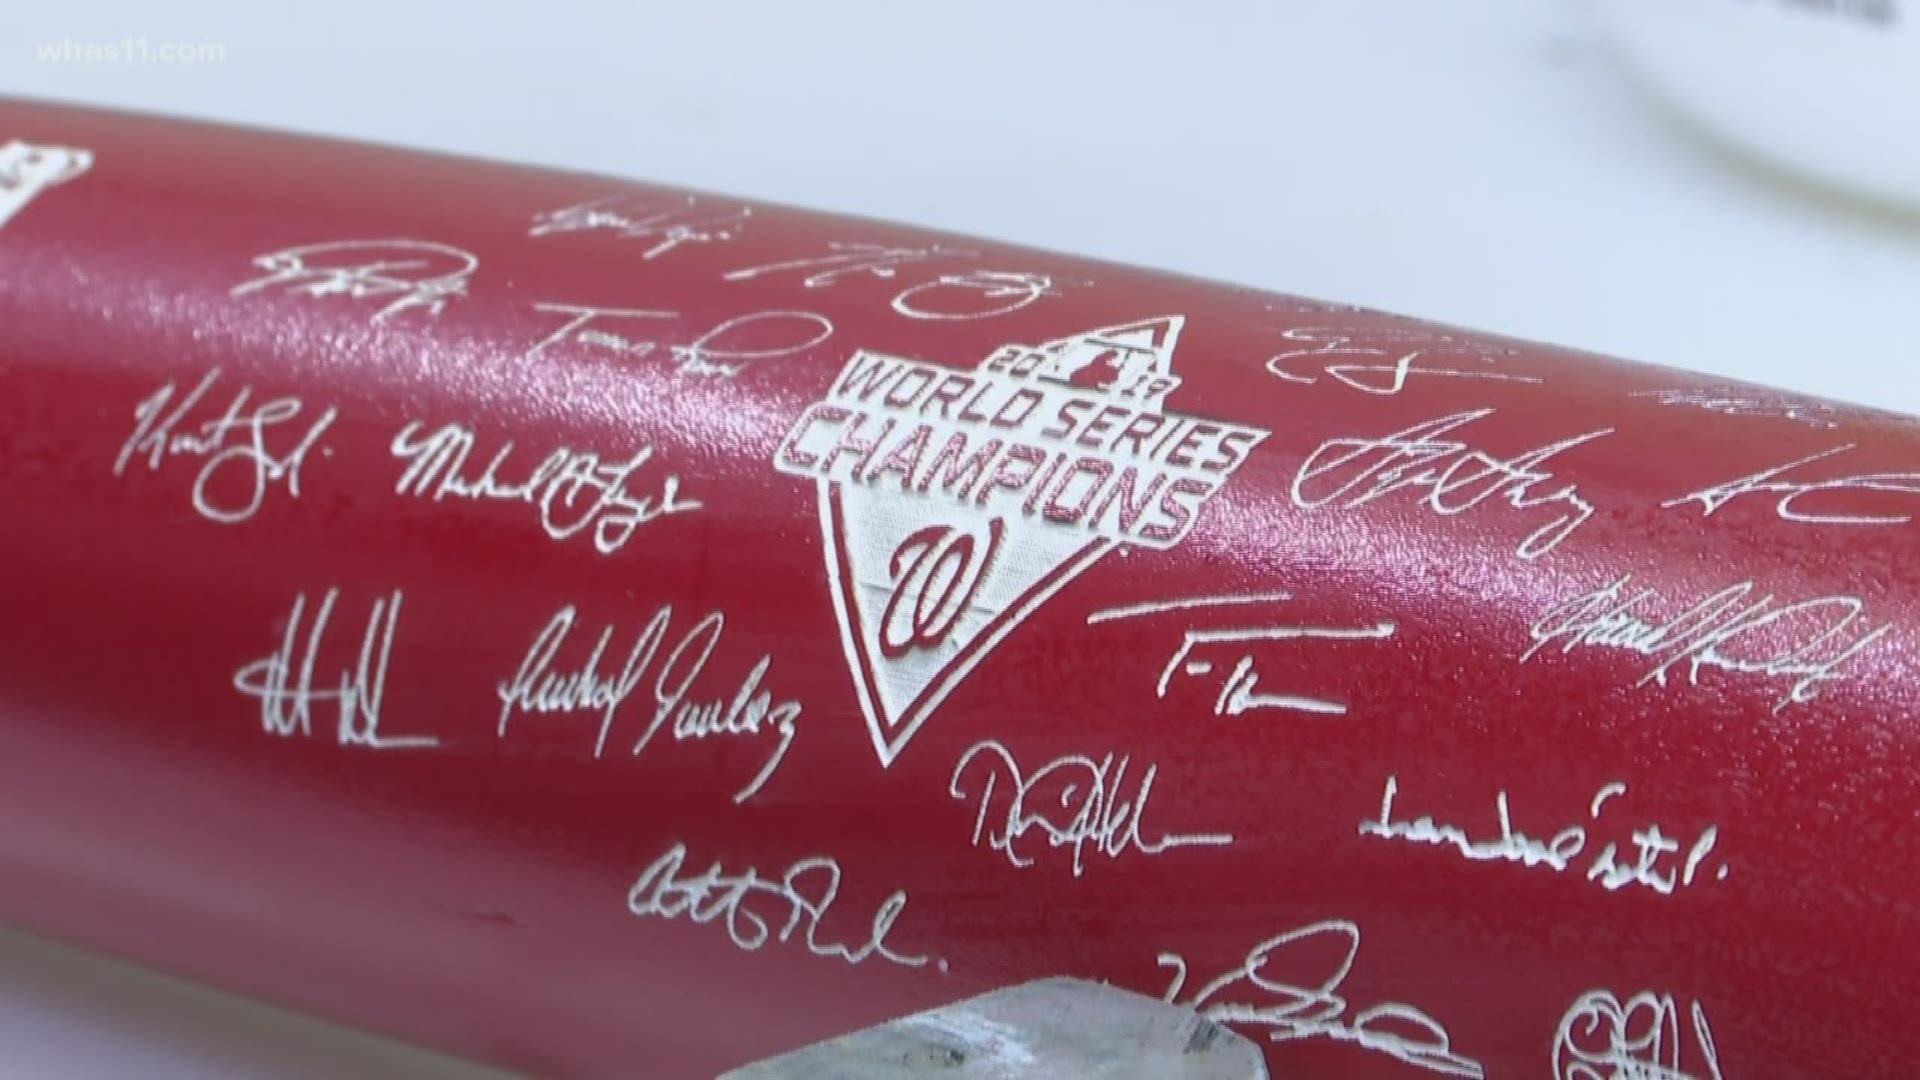 The Louisville Slugger factory is already making commemorative bats for fans of the Washington Nationals, 2019 World Series champions.